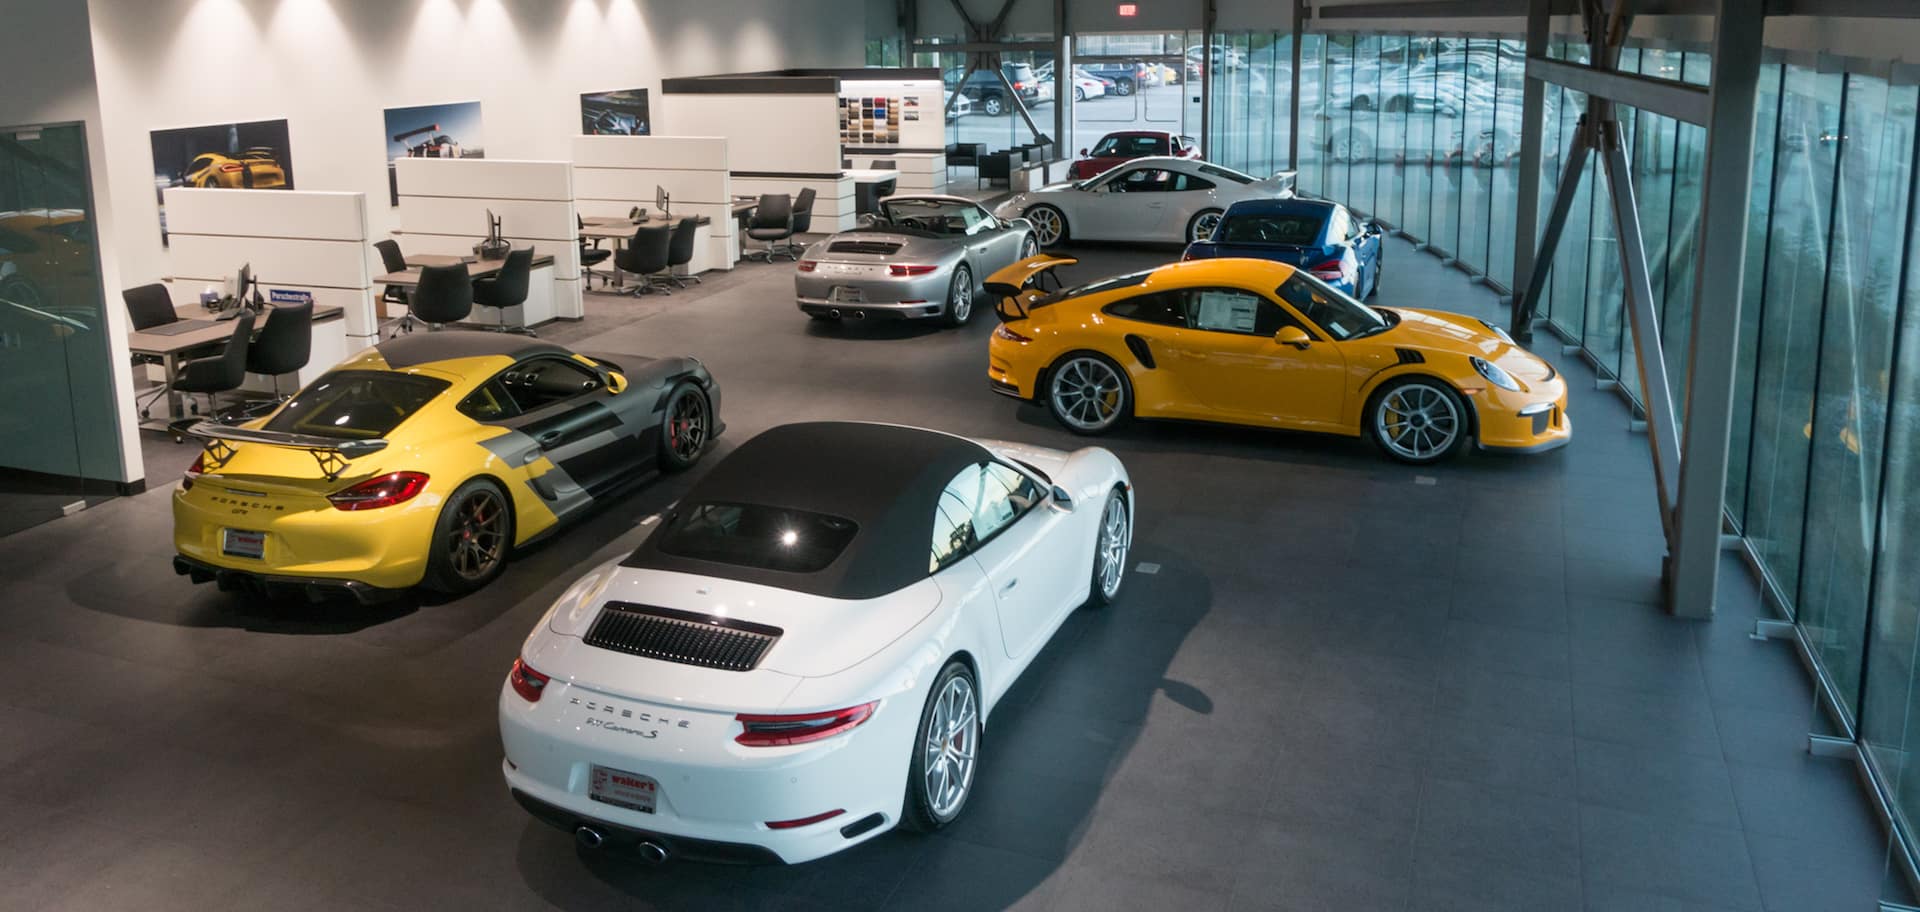 Porsche Sales Performance Dropped by 5% Globally - Businessner